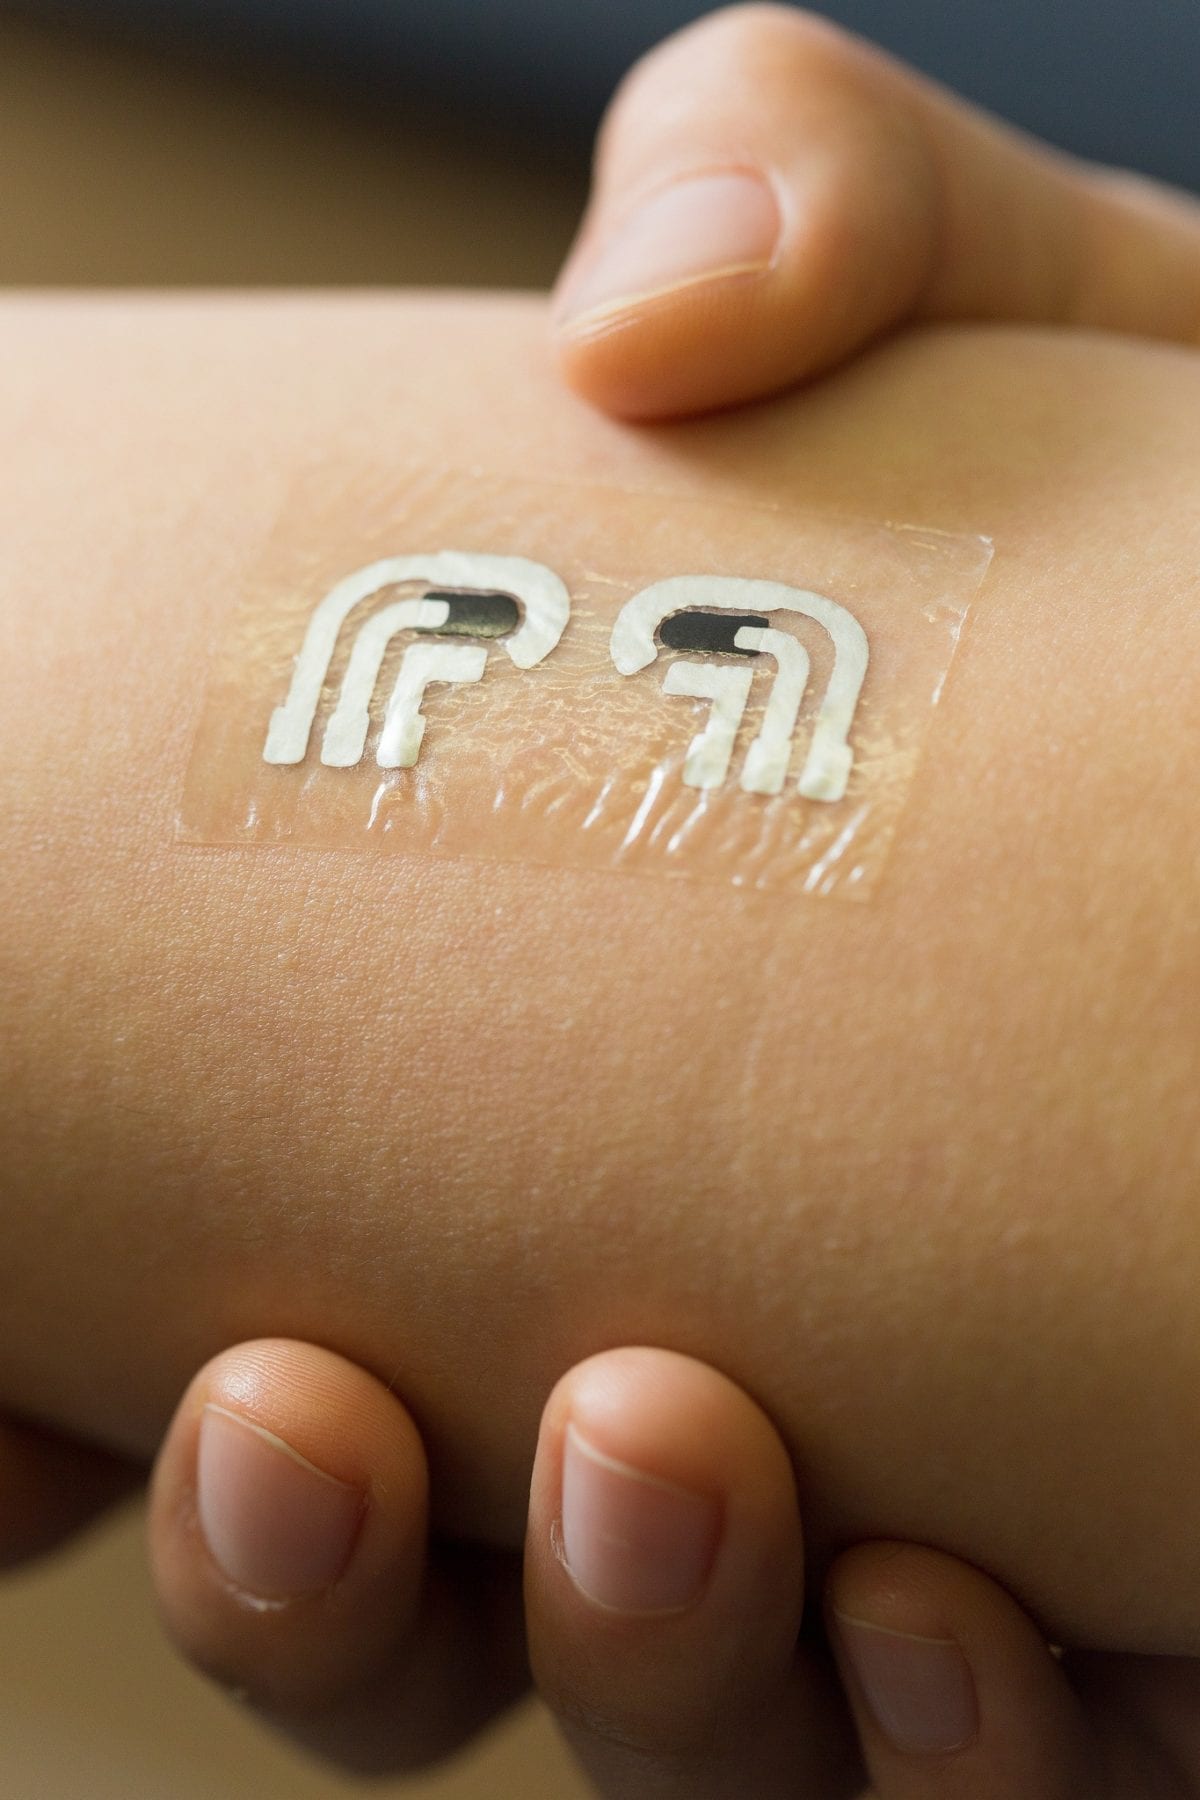 Tattoo-like sensor can detect glucose levels without a painful finger prick